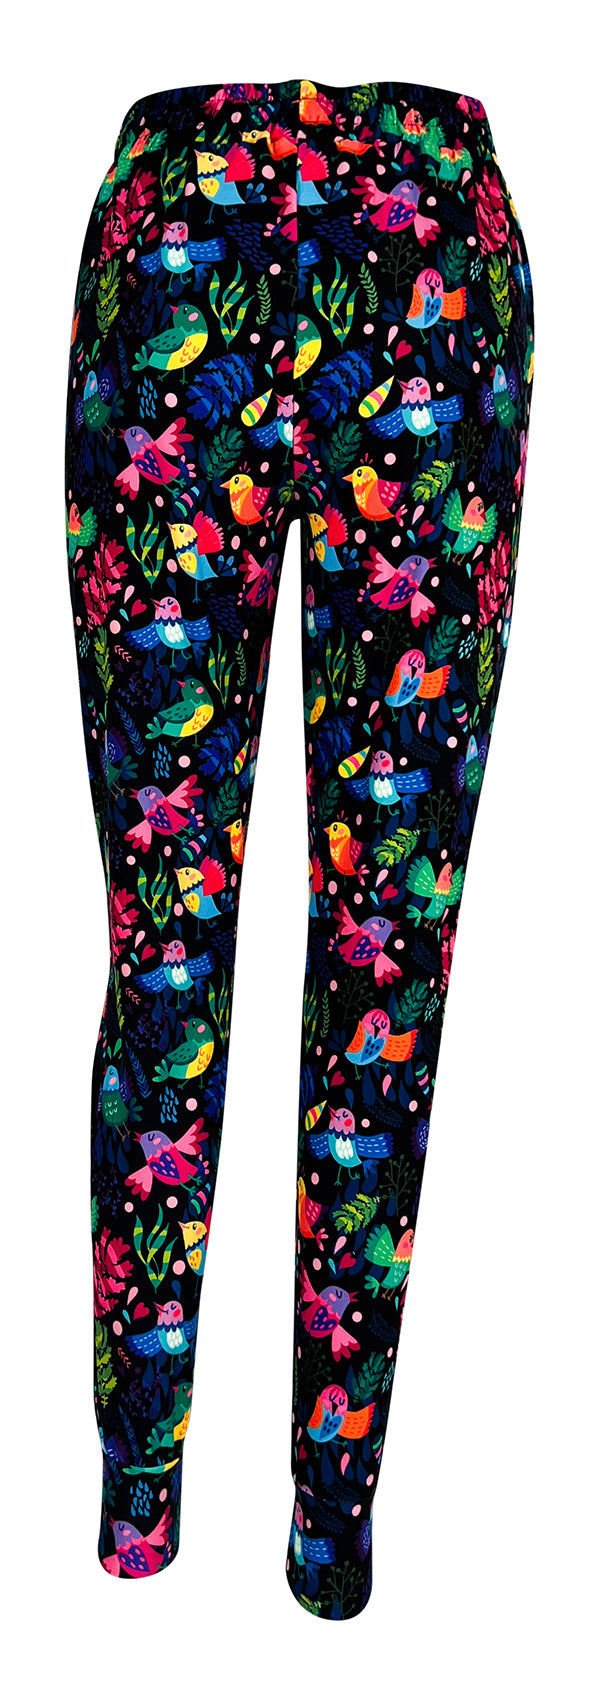 Singing Songbirds Lejoggers-Joggers